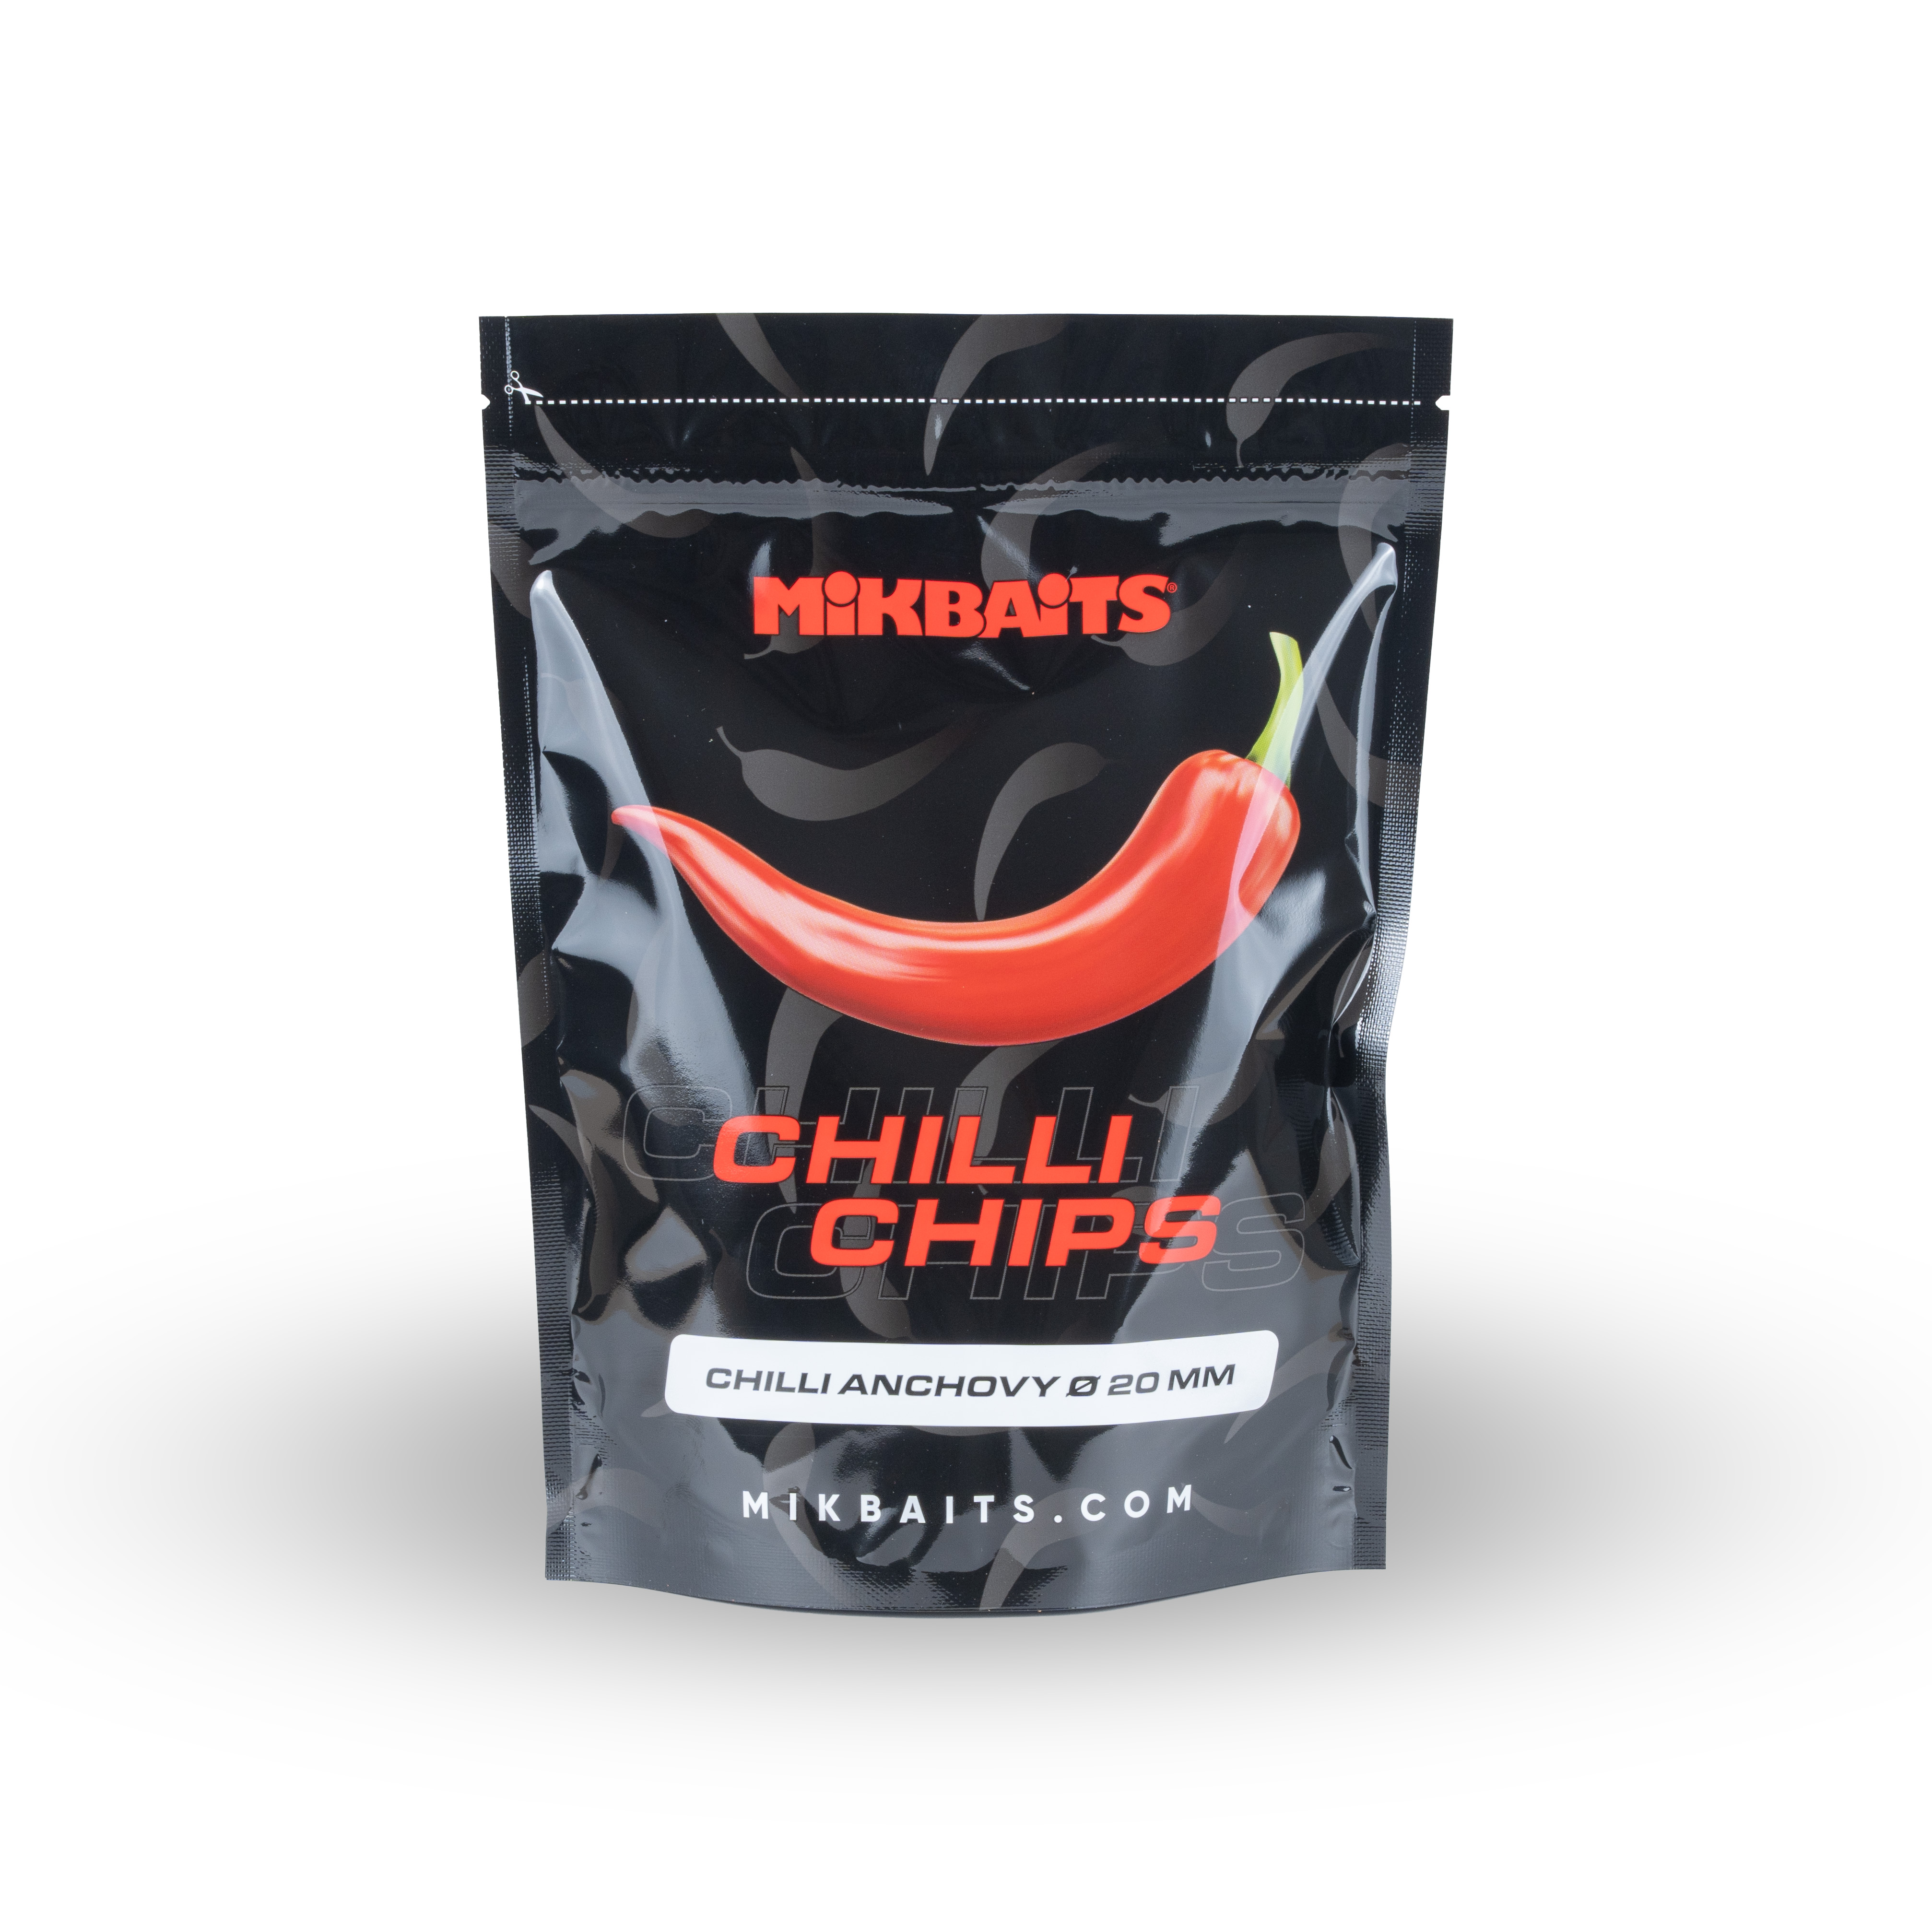 Chilli Chips boilie 300g - Chilli Anchovy 20mm